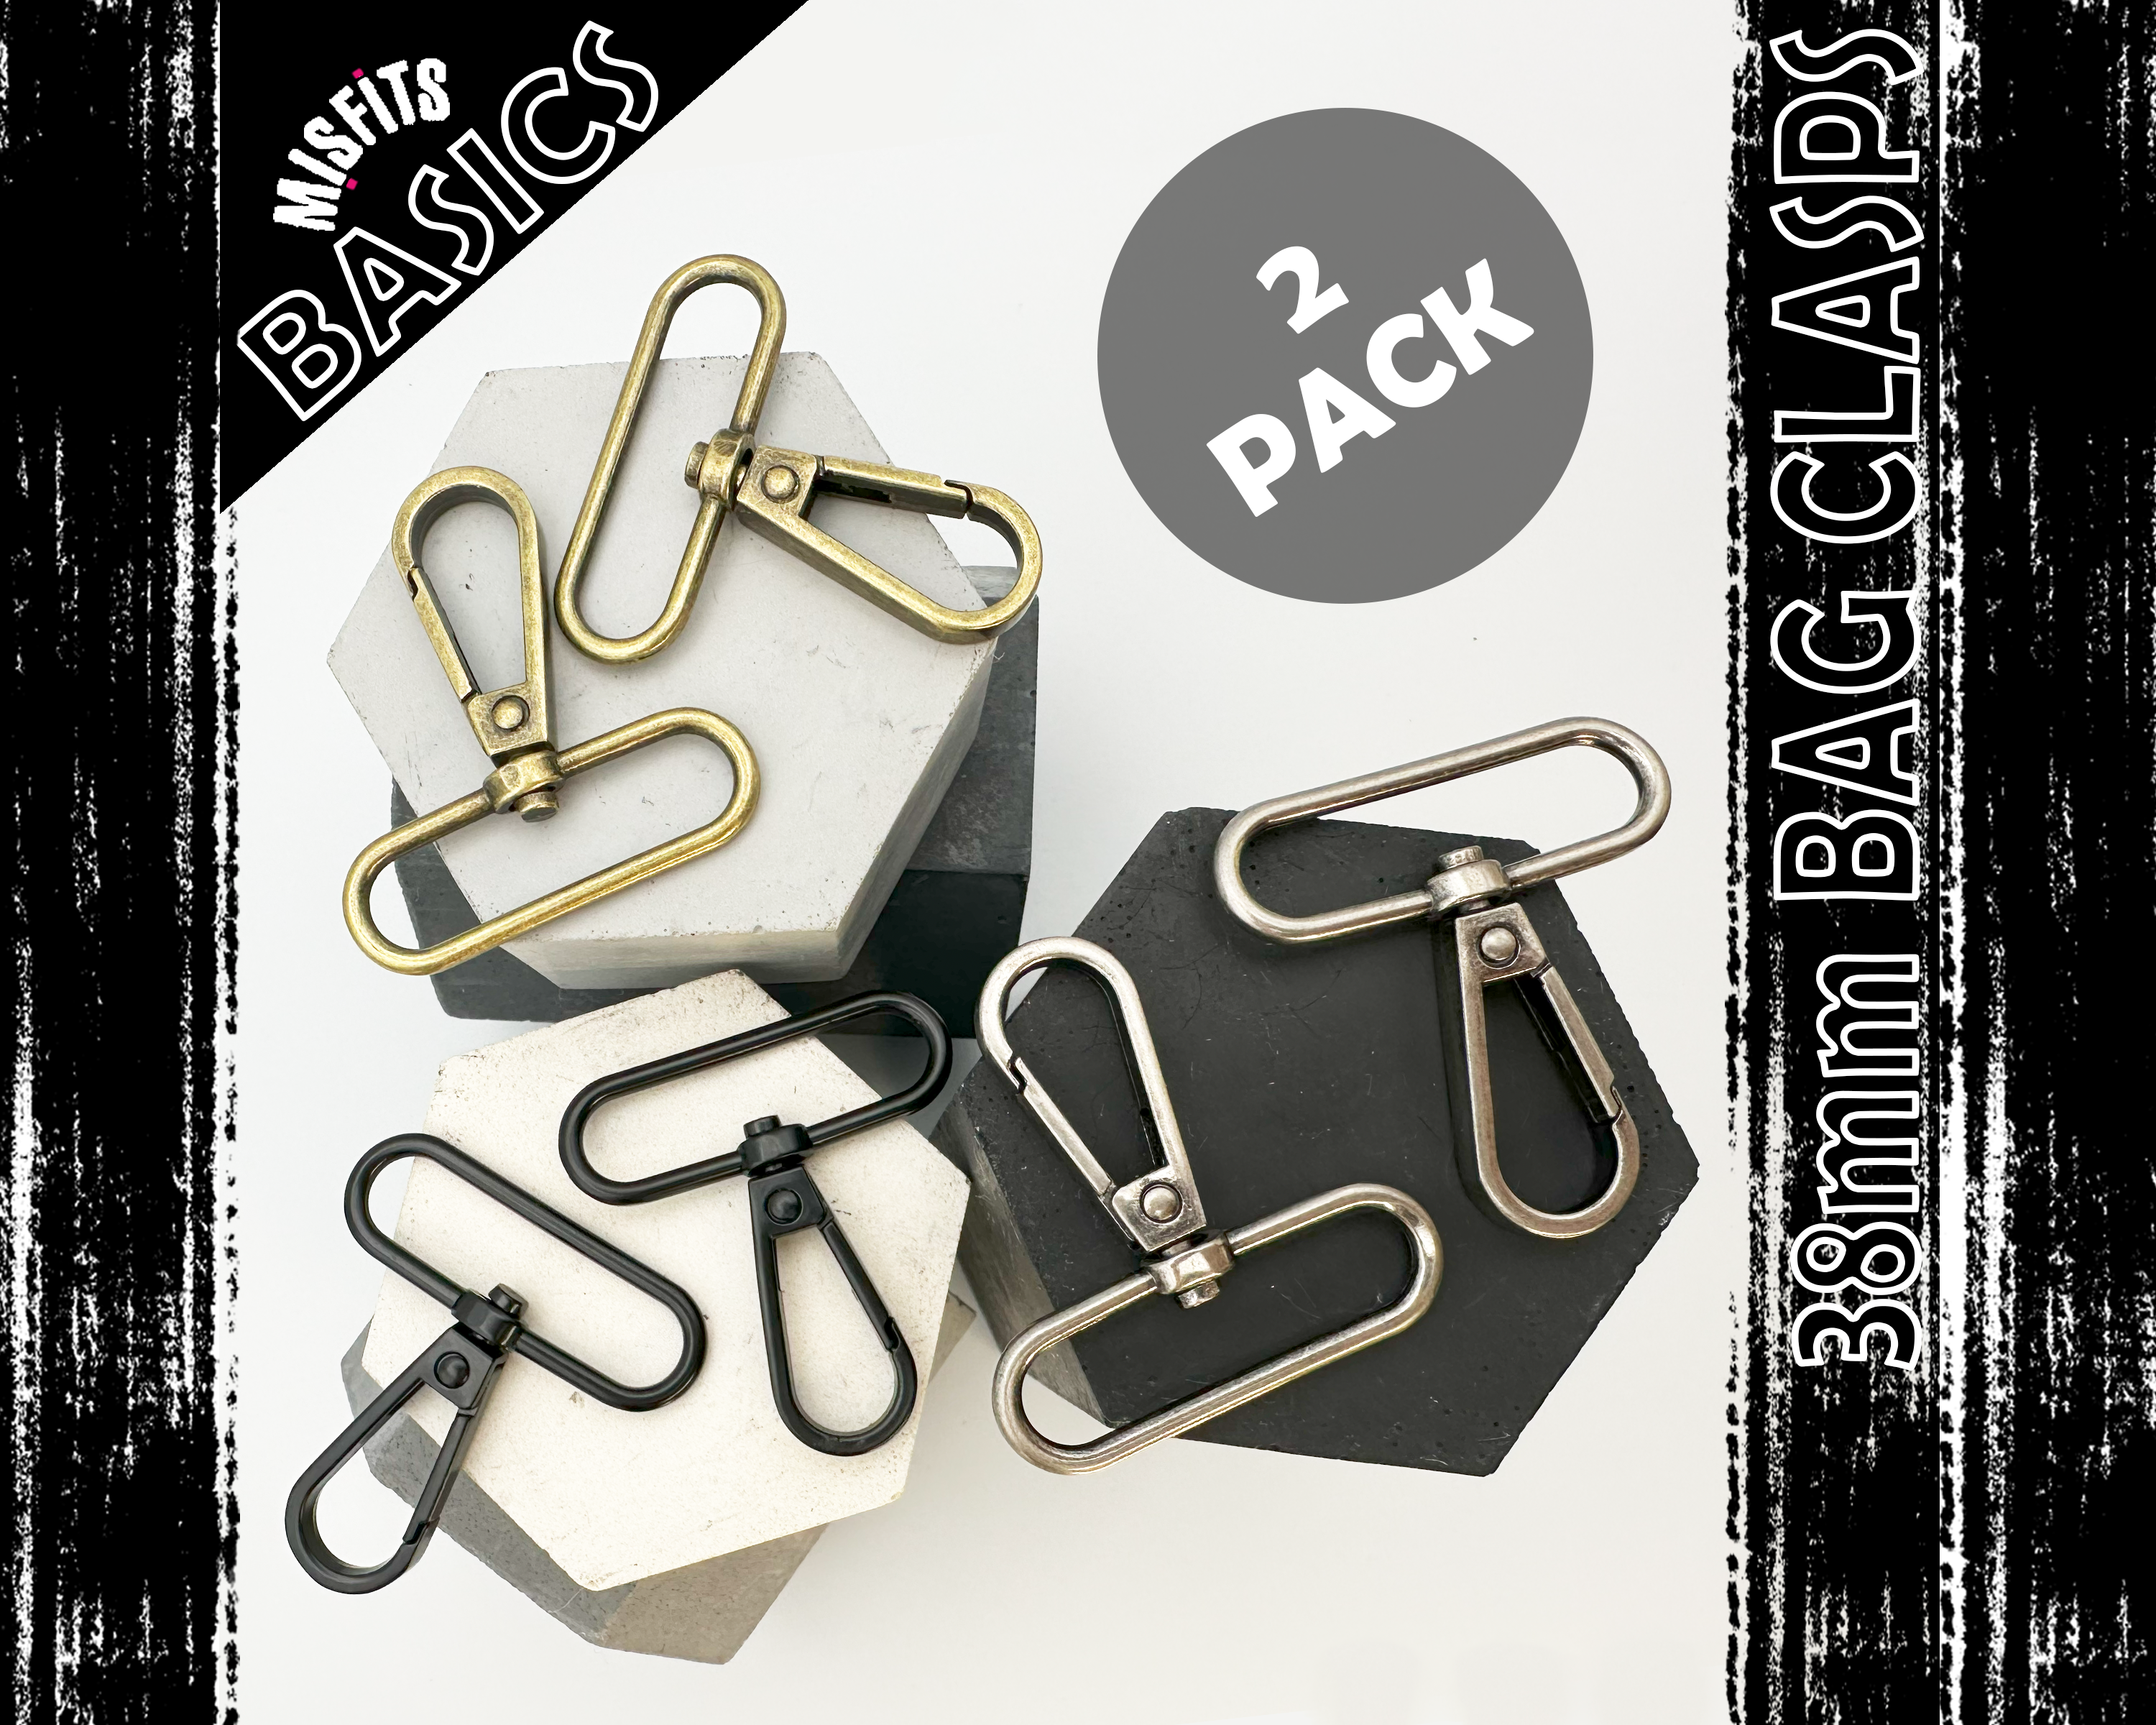 38mm Swivel Hooks, 2 pack, 1 inch clasps, Lobster snaps, Bag Making Hardware Supplies